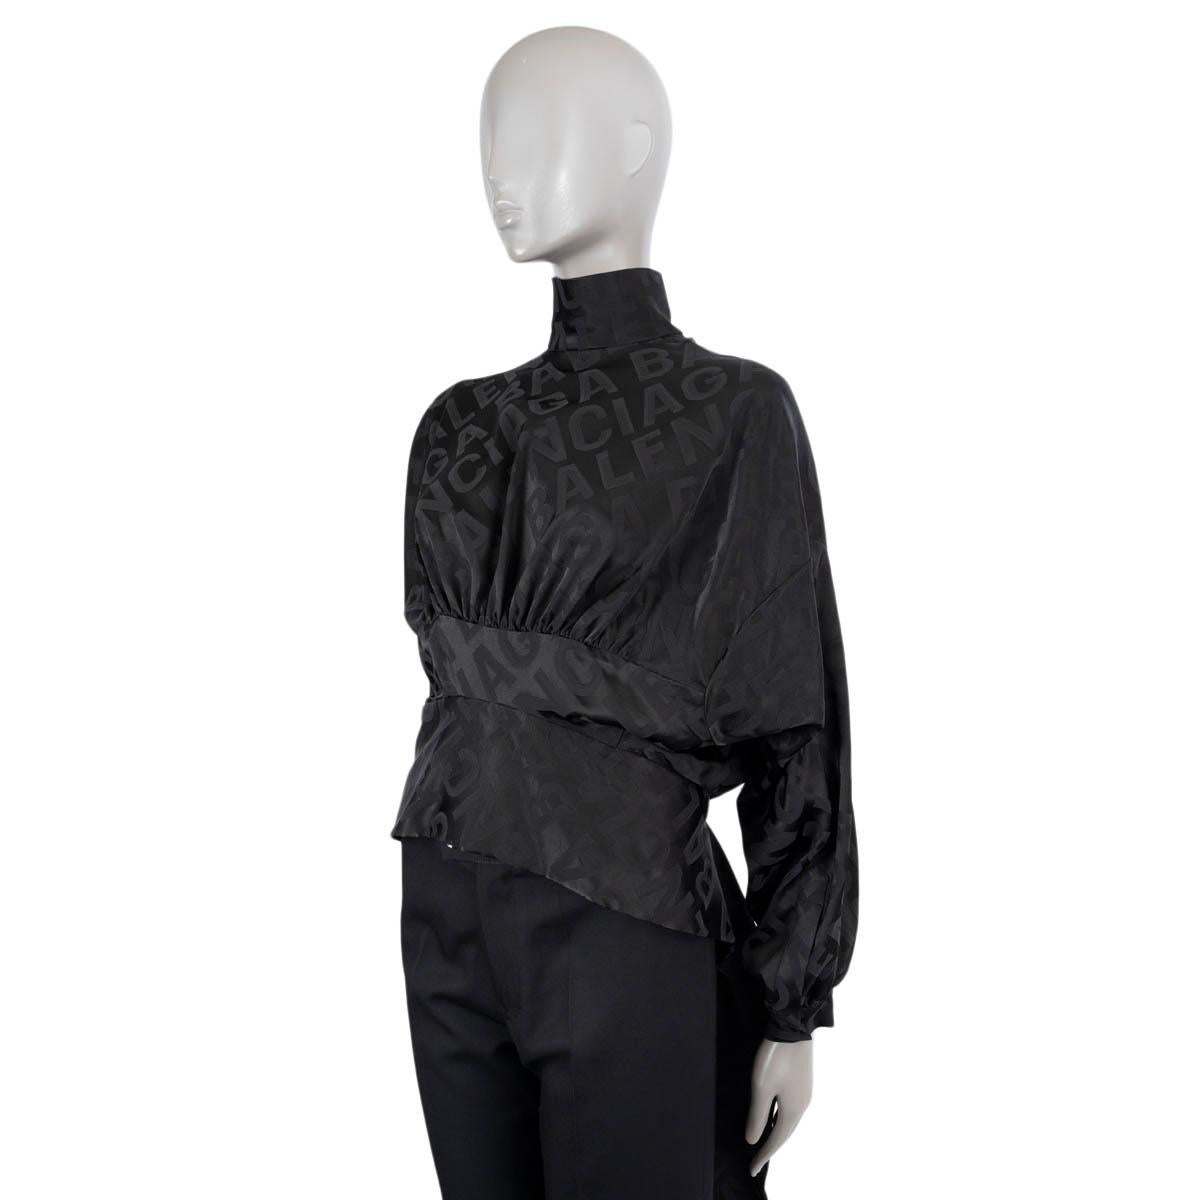 BALENCIAGA black 2020 UPSIDE DOWN HIGH NECK LOGO SATIN Blouse Shirt 36 XS In Excellent Condition For Sale In Zürich, CH